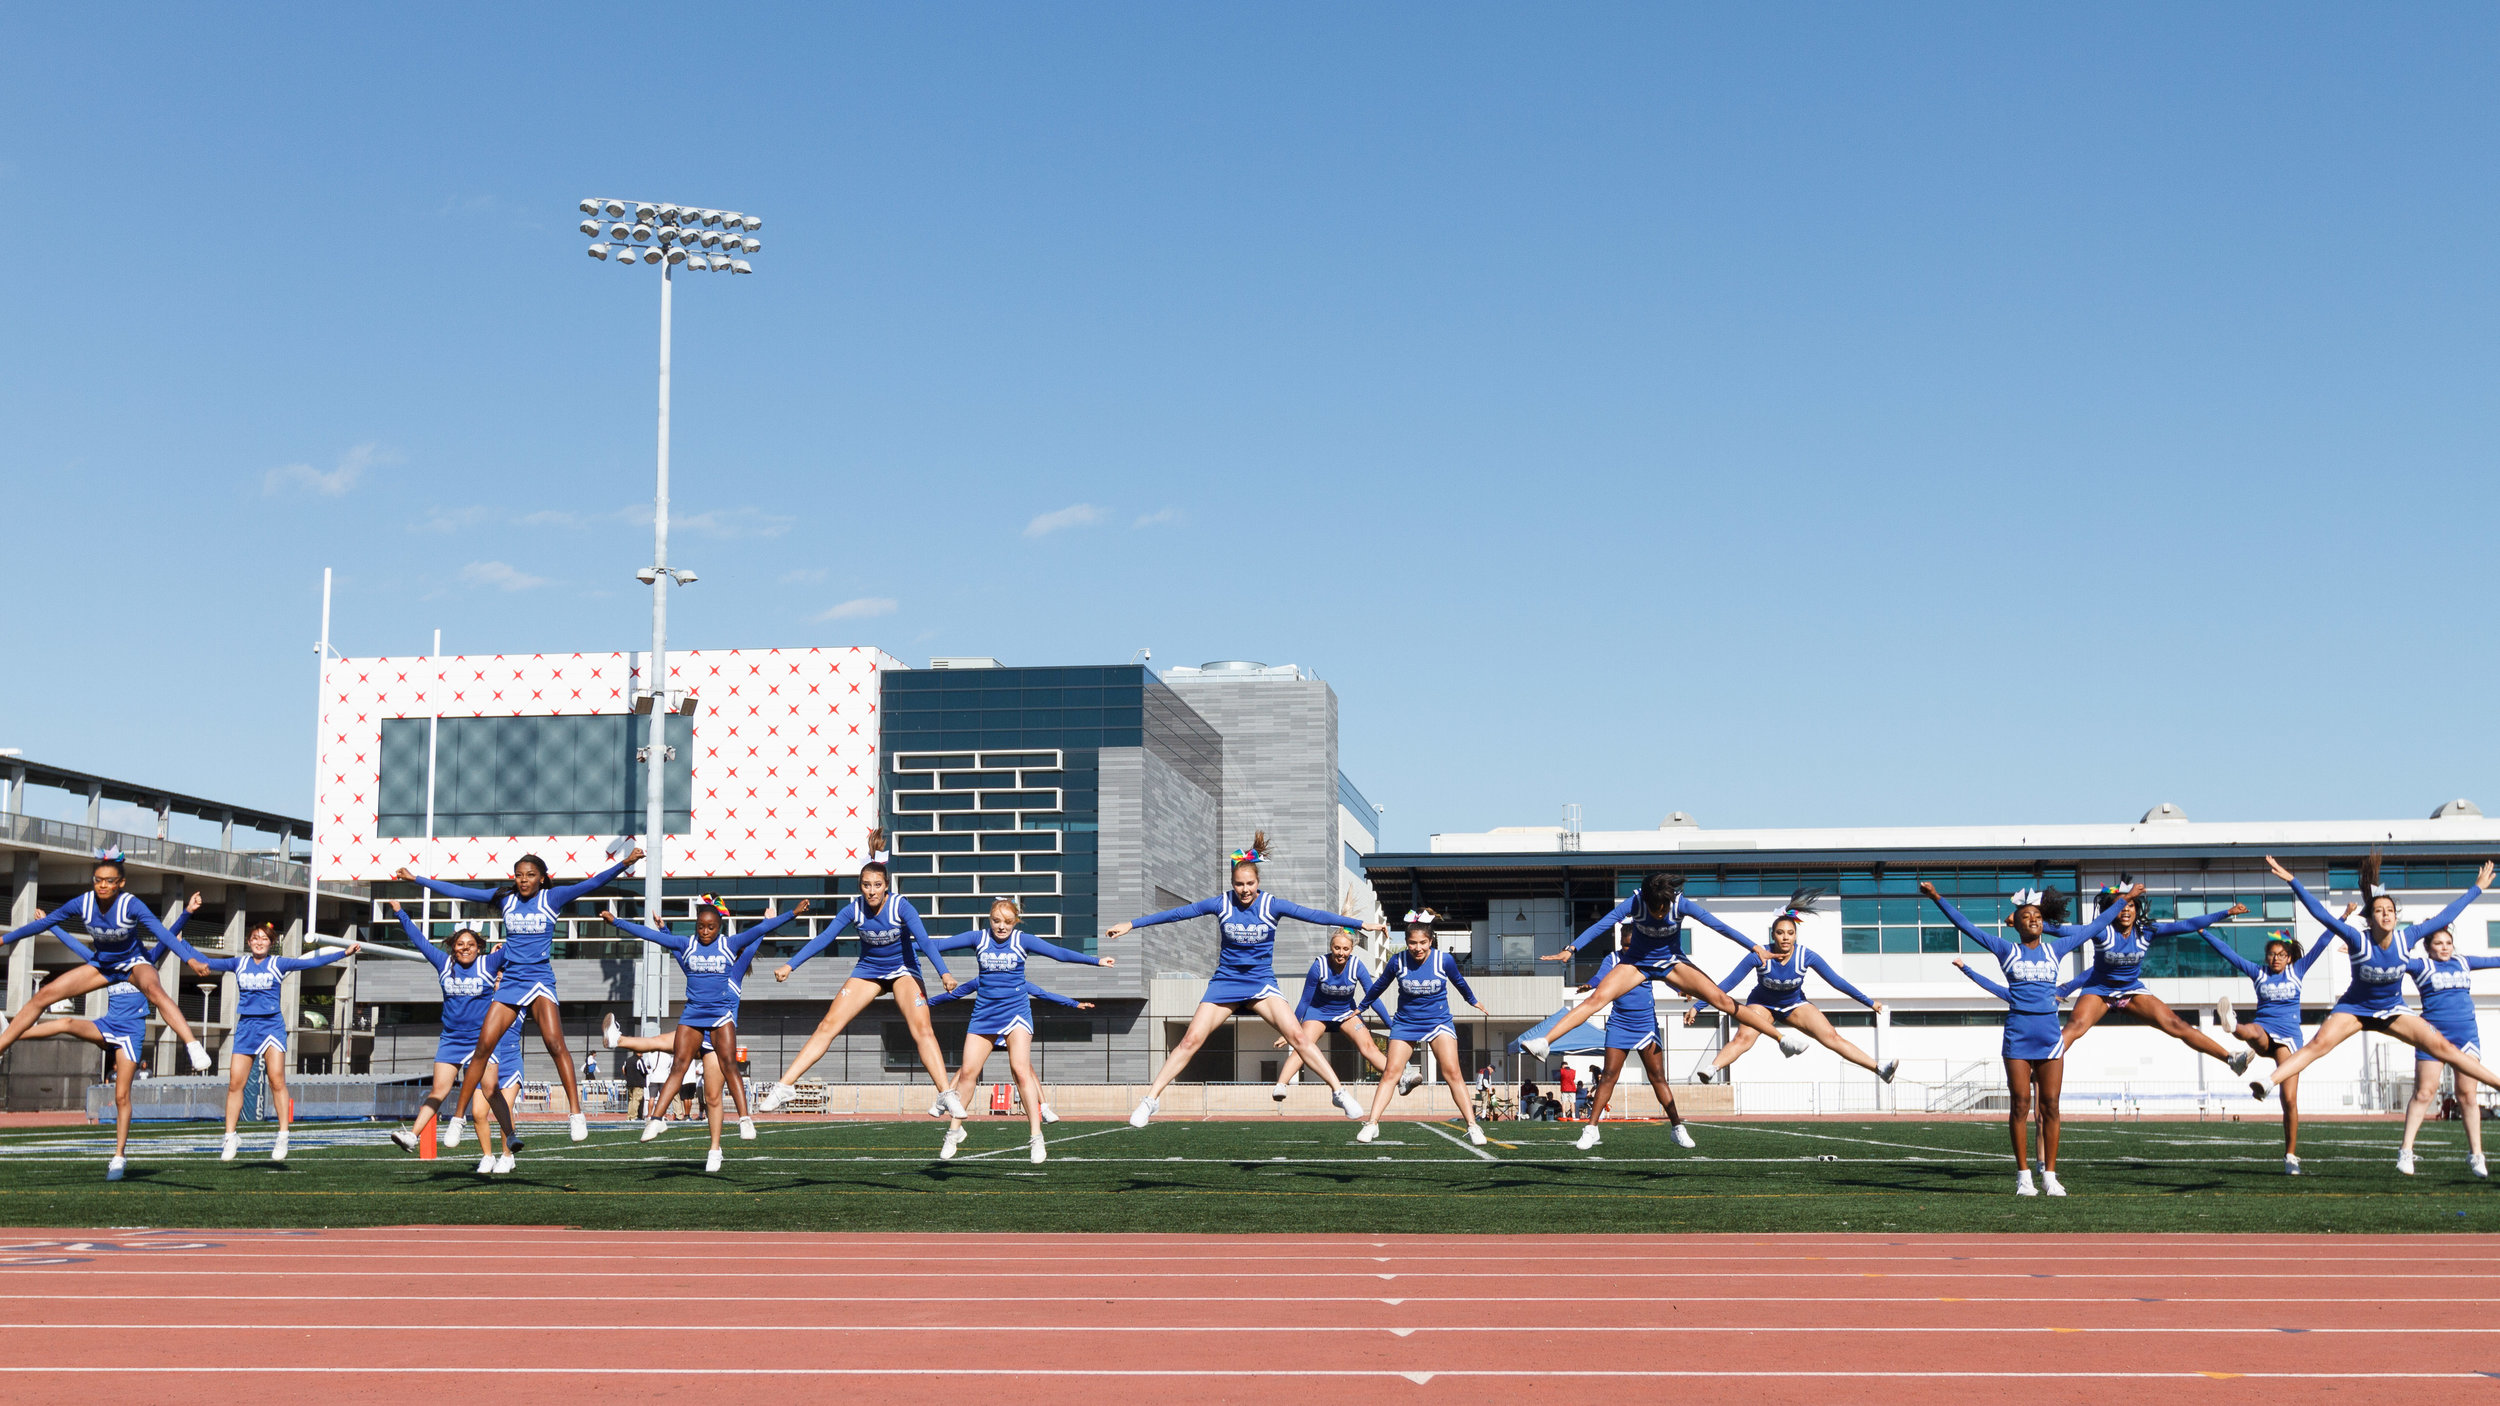  The Santa Monica College Cheer Club performs during halftime. The Santa Monica College Corsairs lose their final home game 7-48 to the College of the Canyons Cougars and will play their final game of the season away at Moorpark on Saturday, November